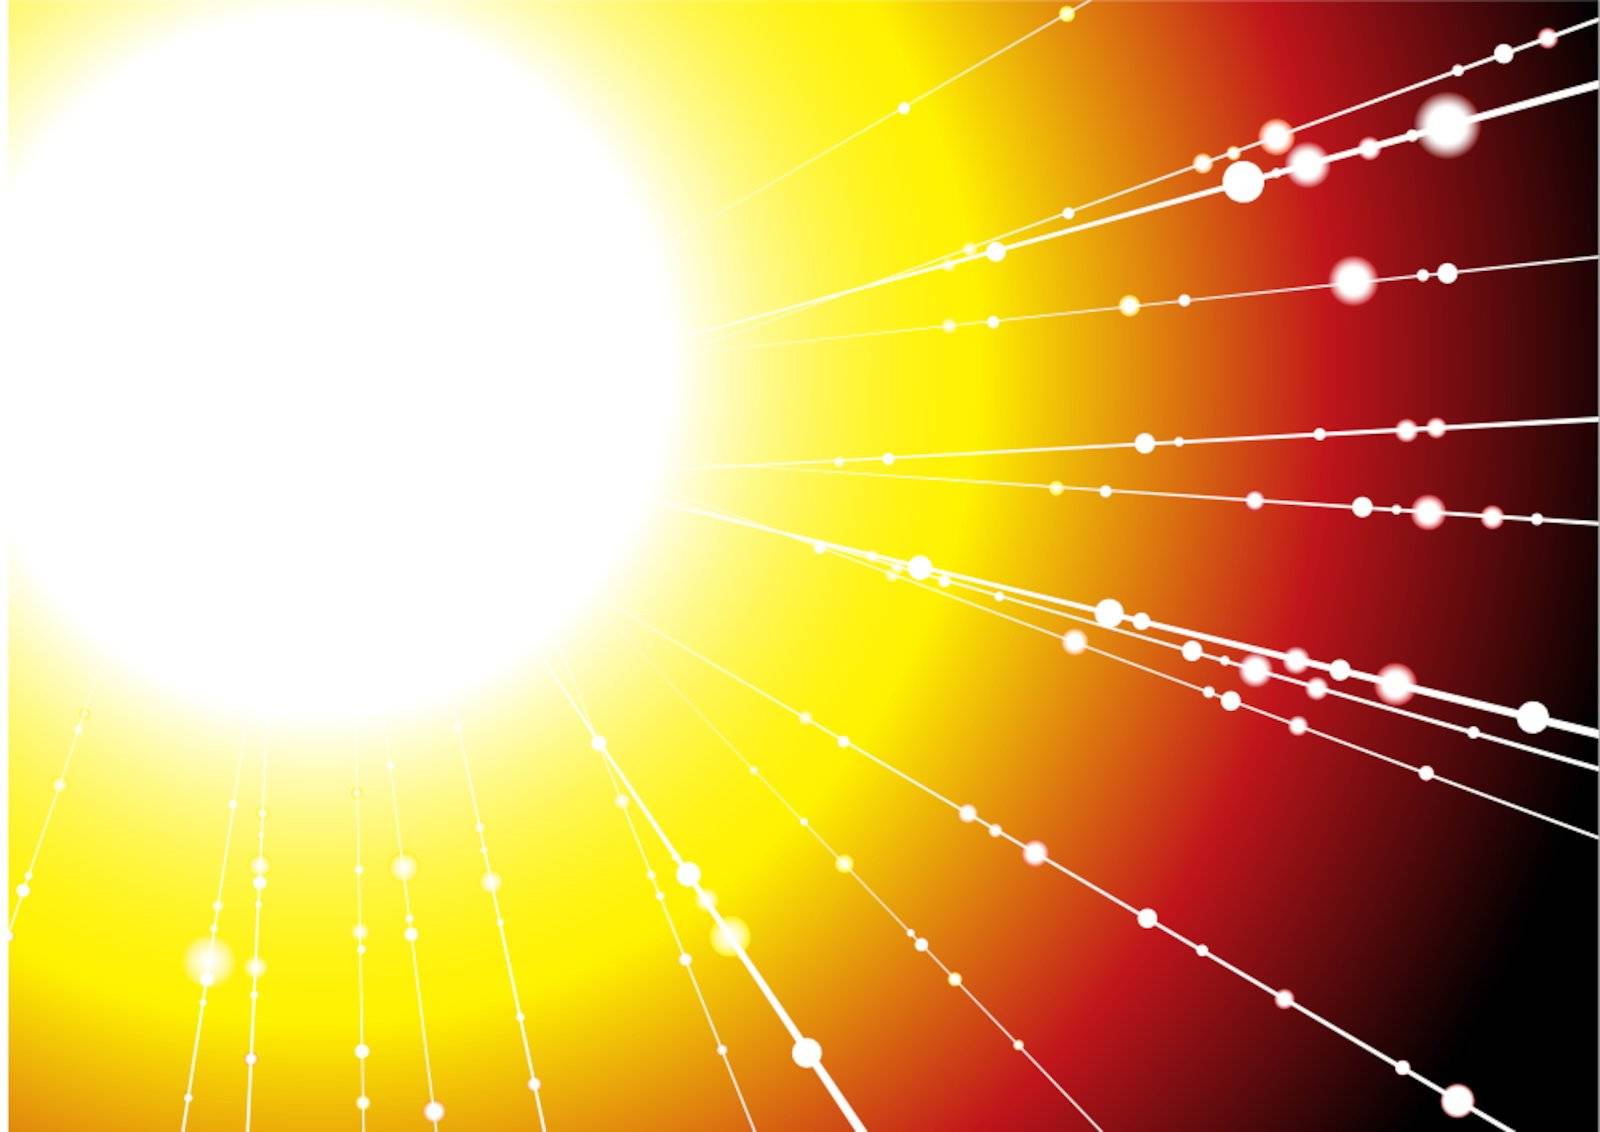 Abstract illustrated sun image with rays of light shooting out